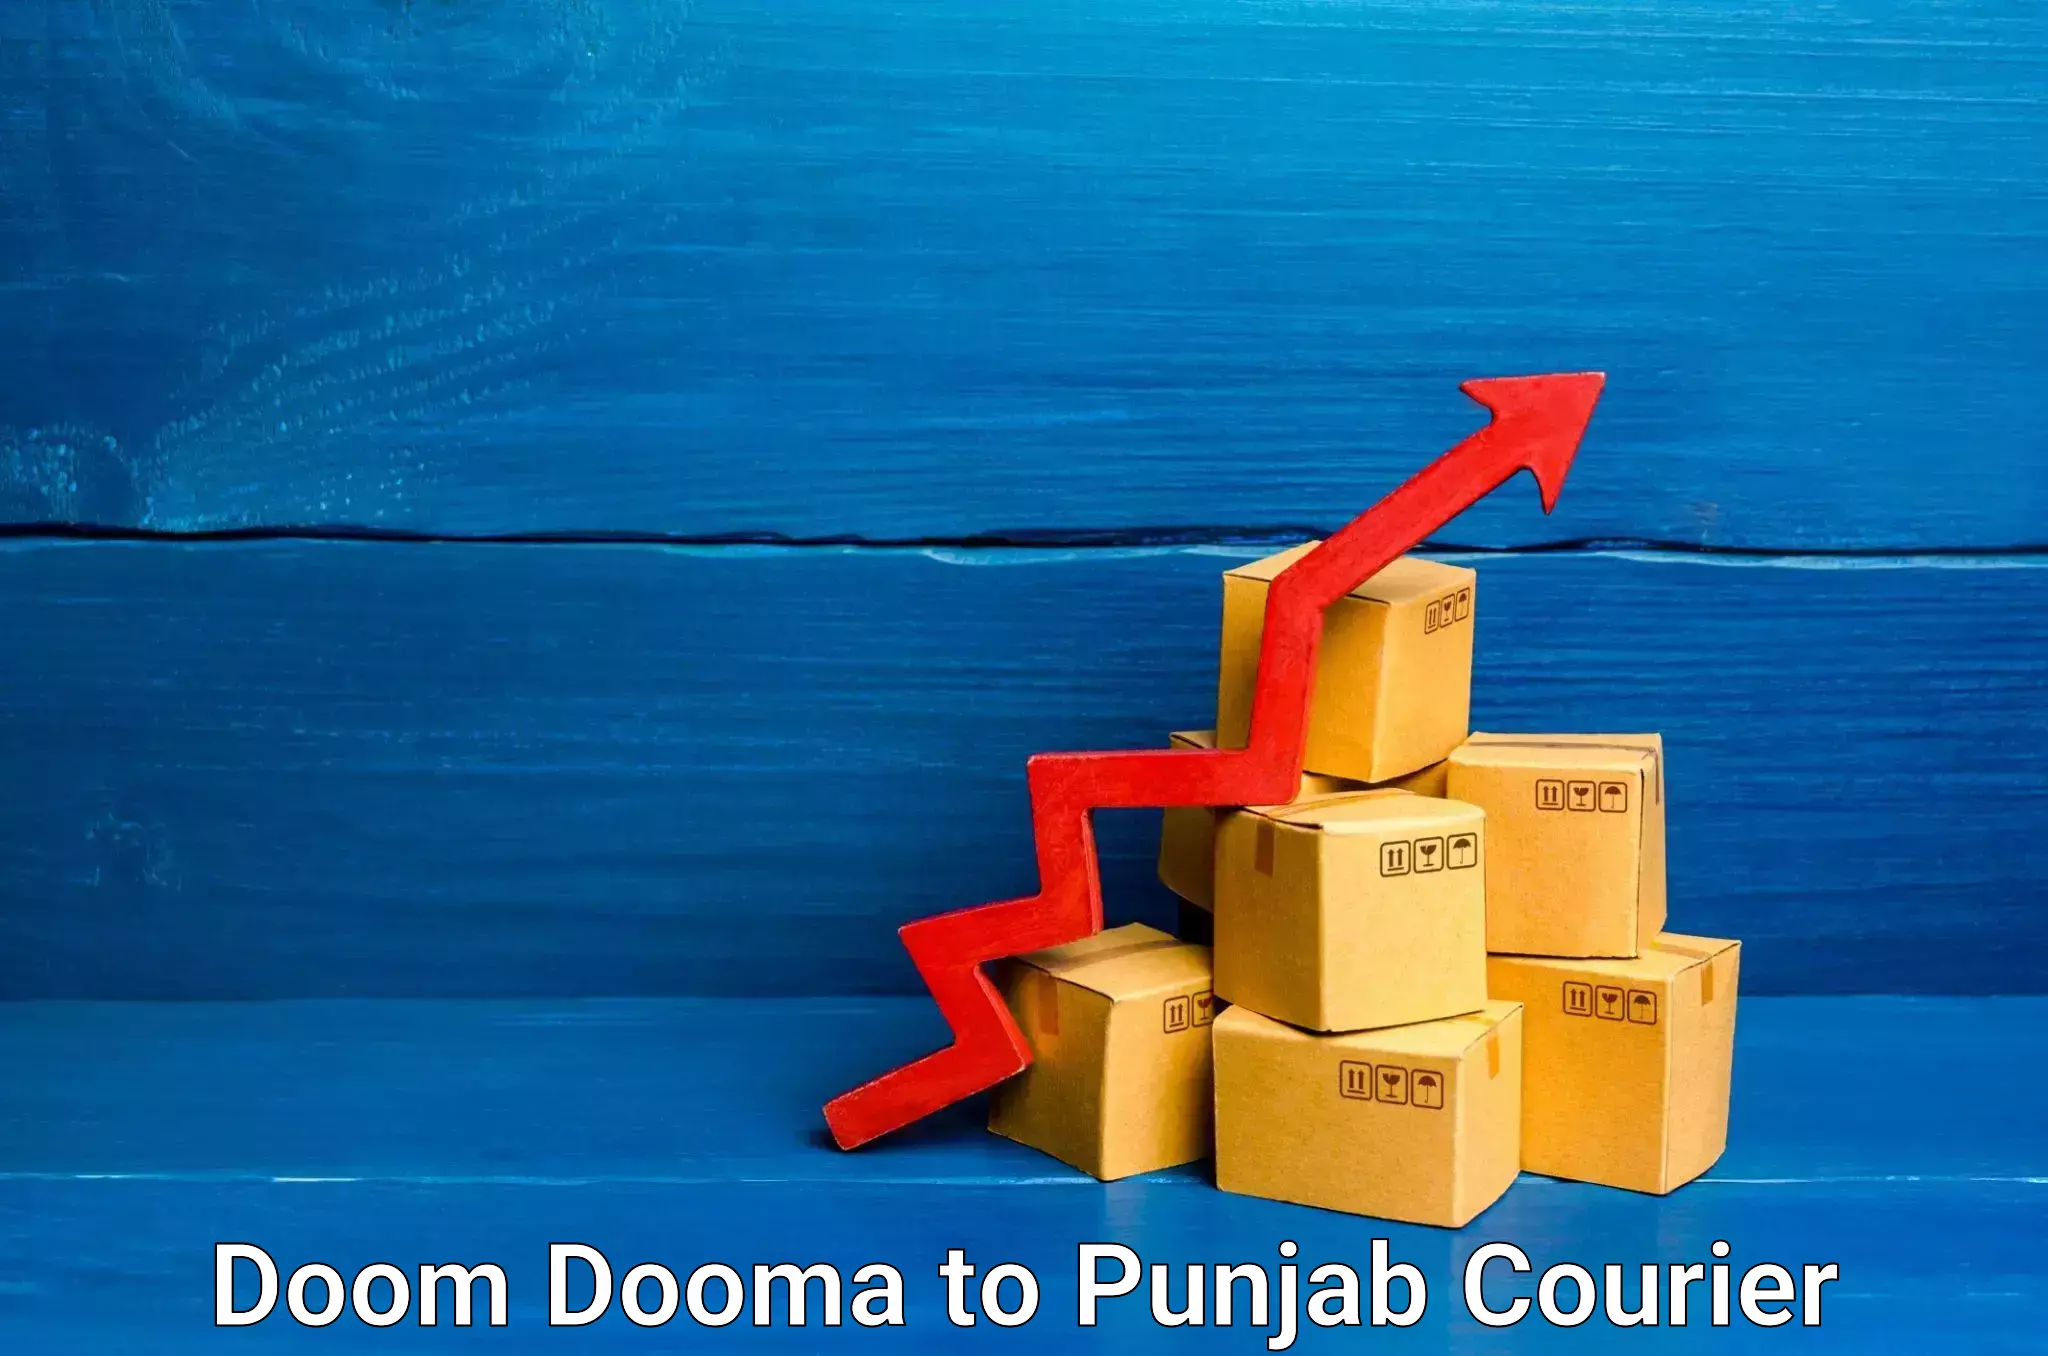 Postal and courier services Doom Dooma to Central University of Punjab Bathinda